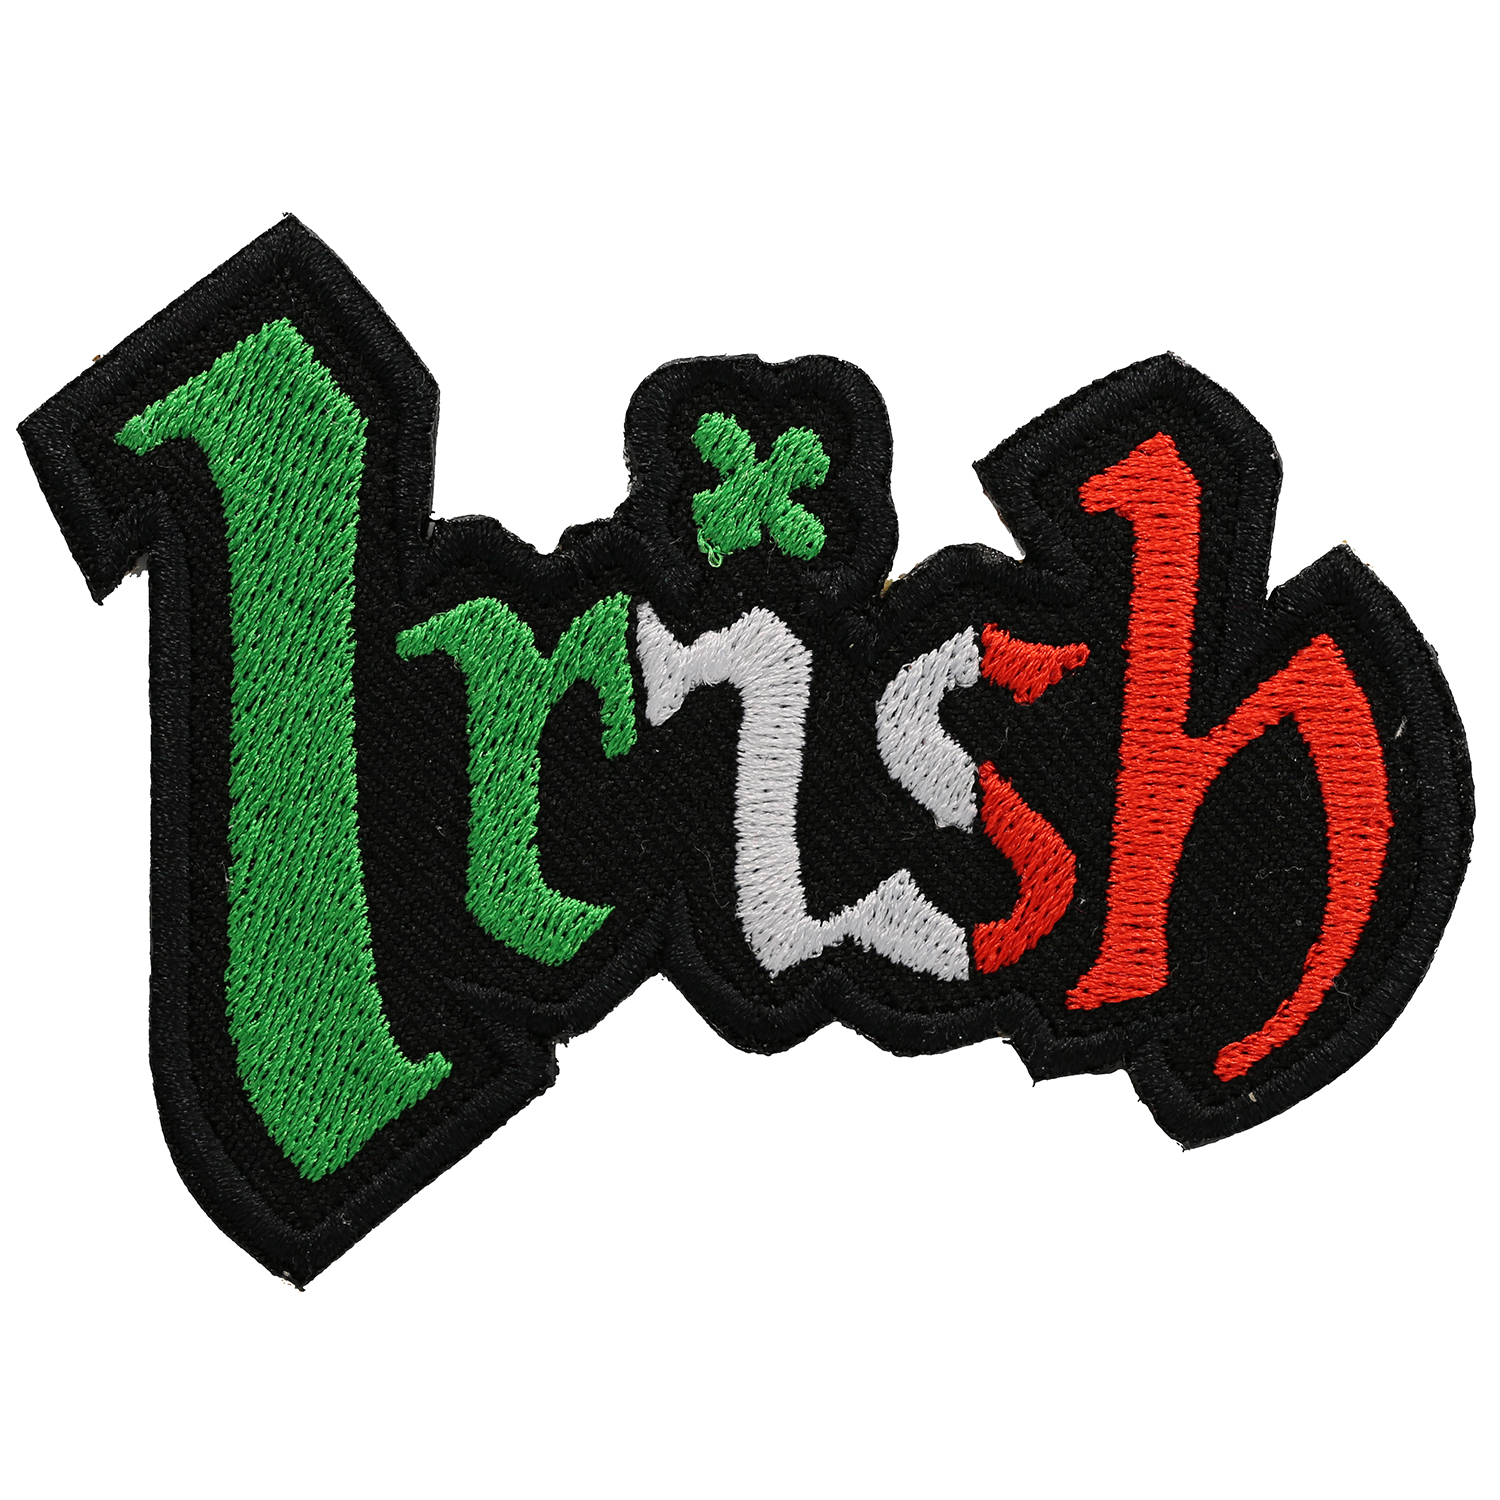 New Irish Flag Embroidered Biker Leather Vest Patch